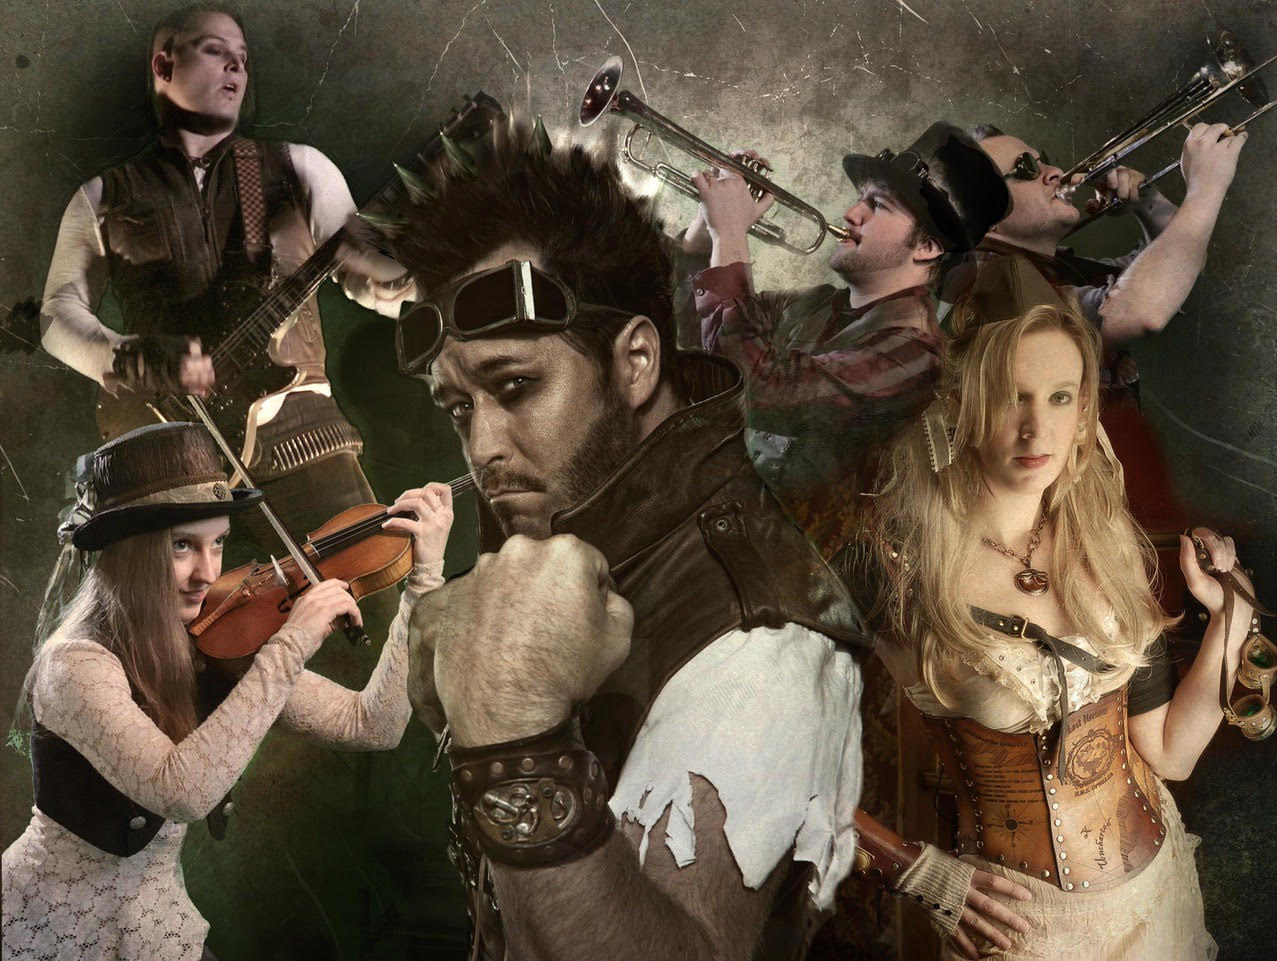 Abney Park’s Captain Robert: The Godfather of Steampunk Music Speaks